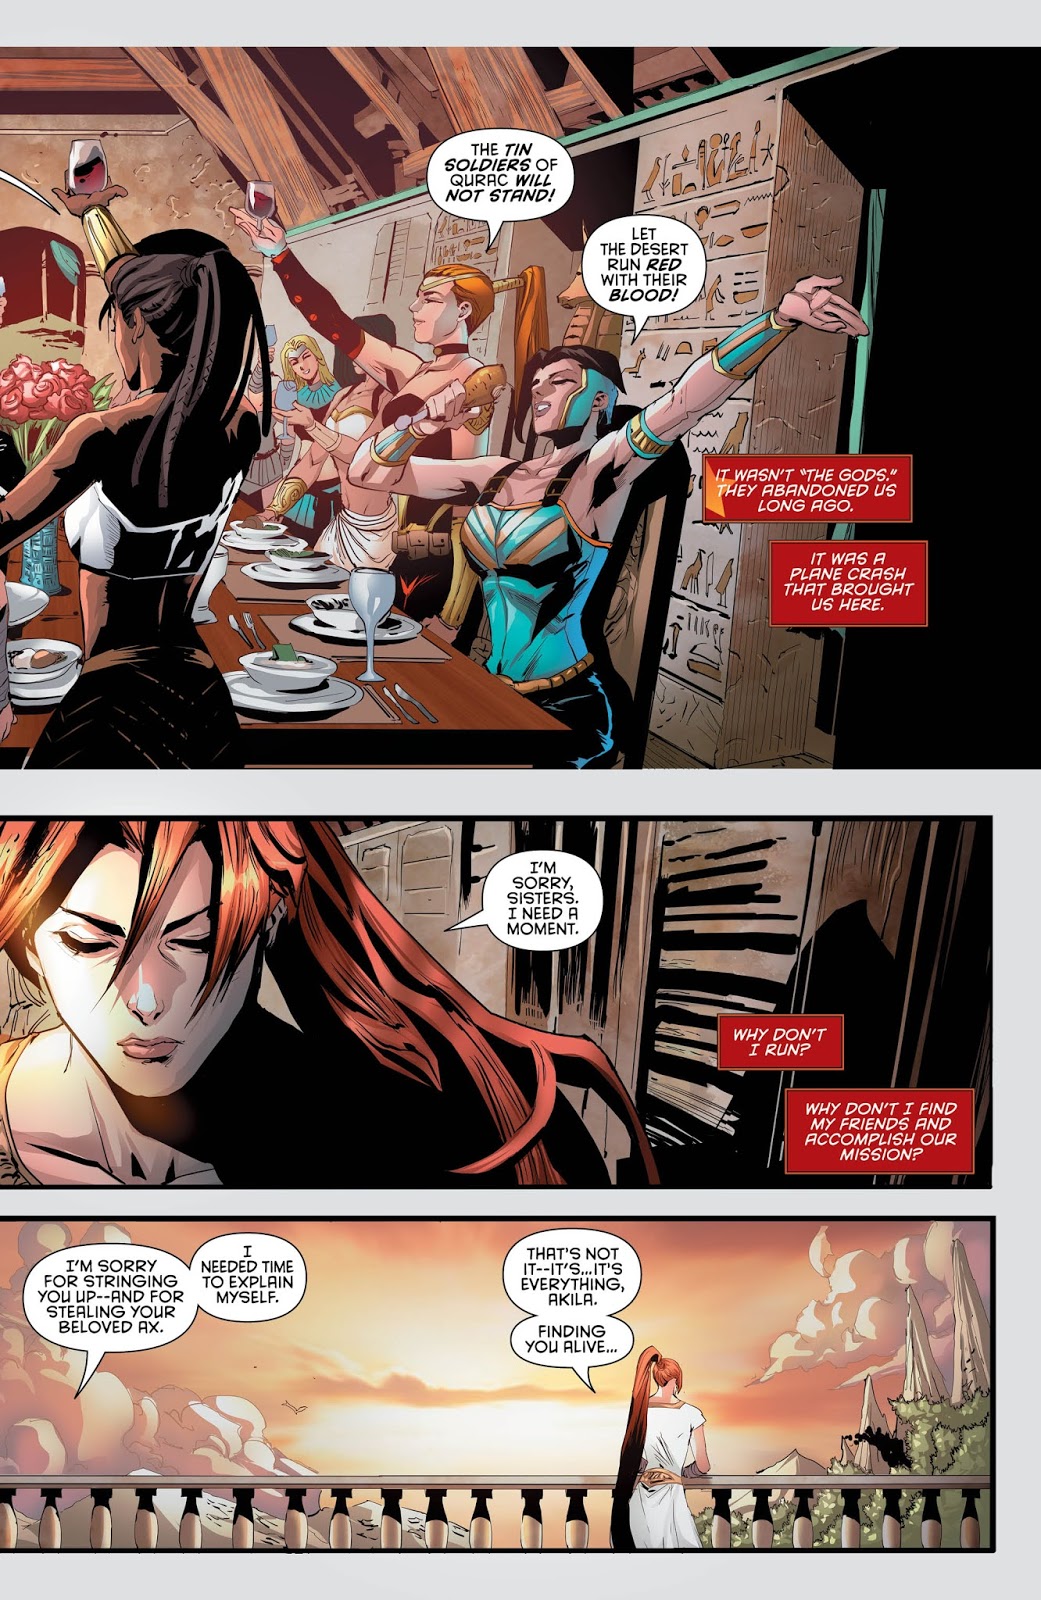 Weird Science DC Comics: Red Hood and the Outlaws #10 Review and *SPOILERS*